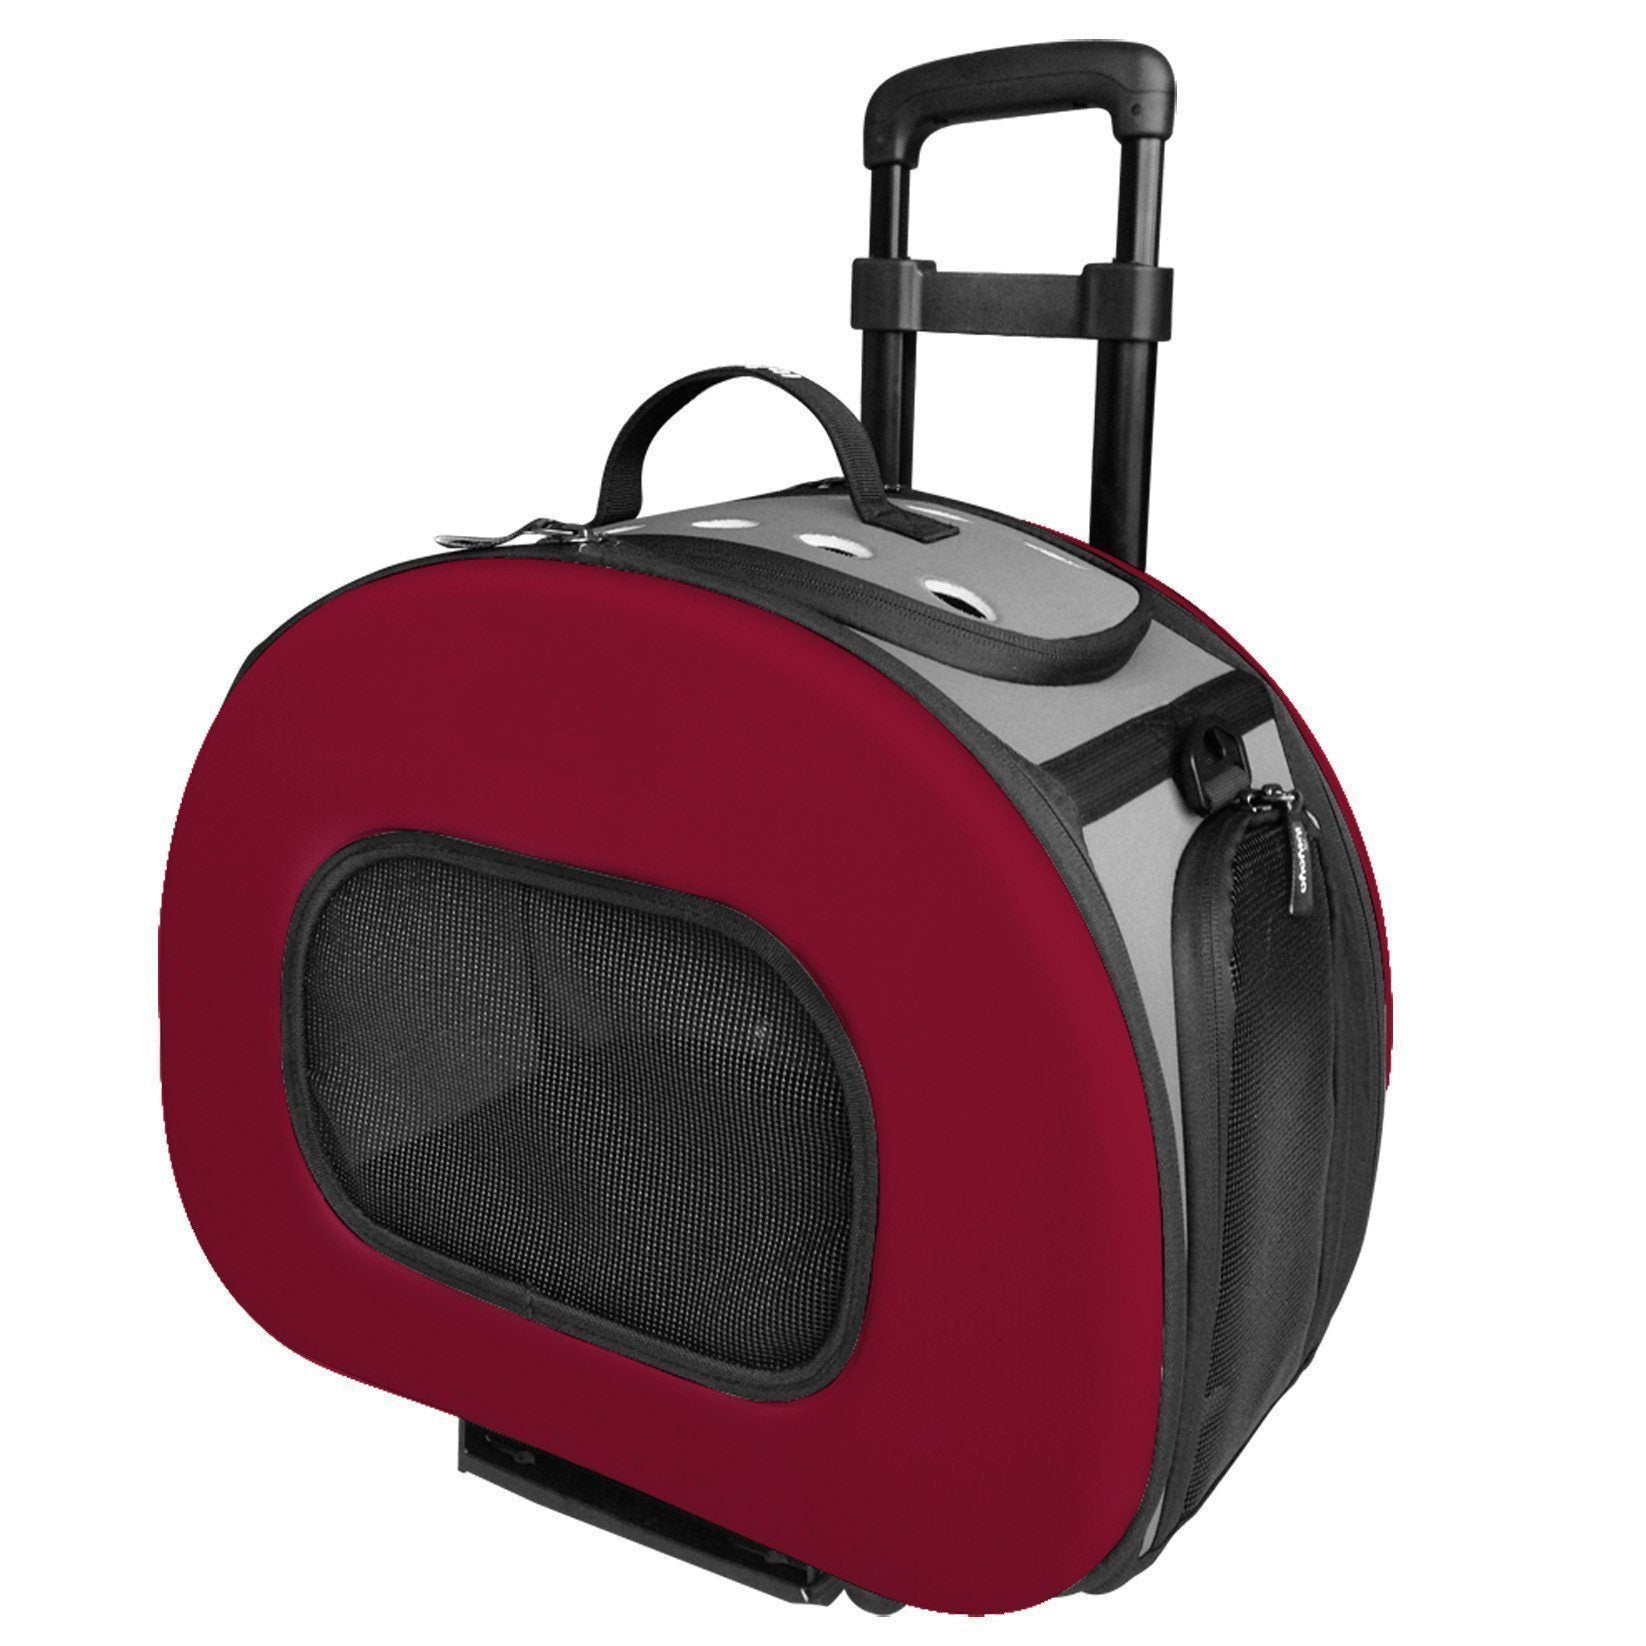 Pet Life ® 'Final Destination' Airline Approved 2-in-1 Tough-Shell Wheeled Collapsible Travel Fashion Pet Dog Carrier Crate Red 